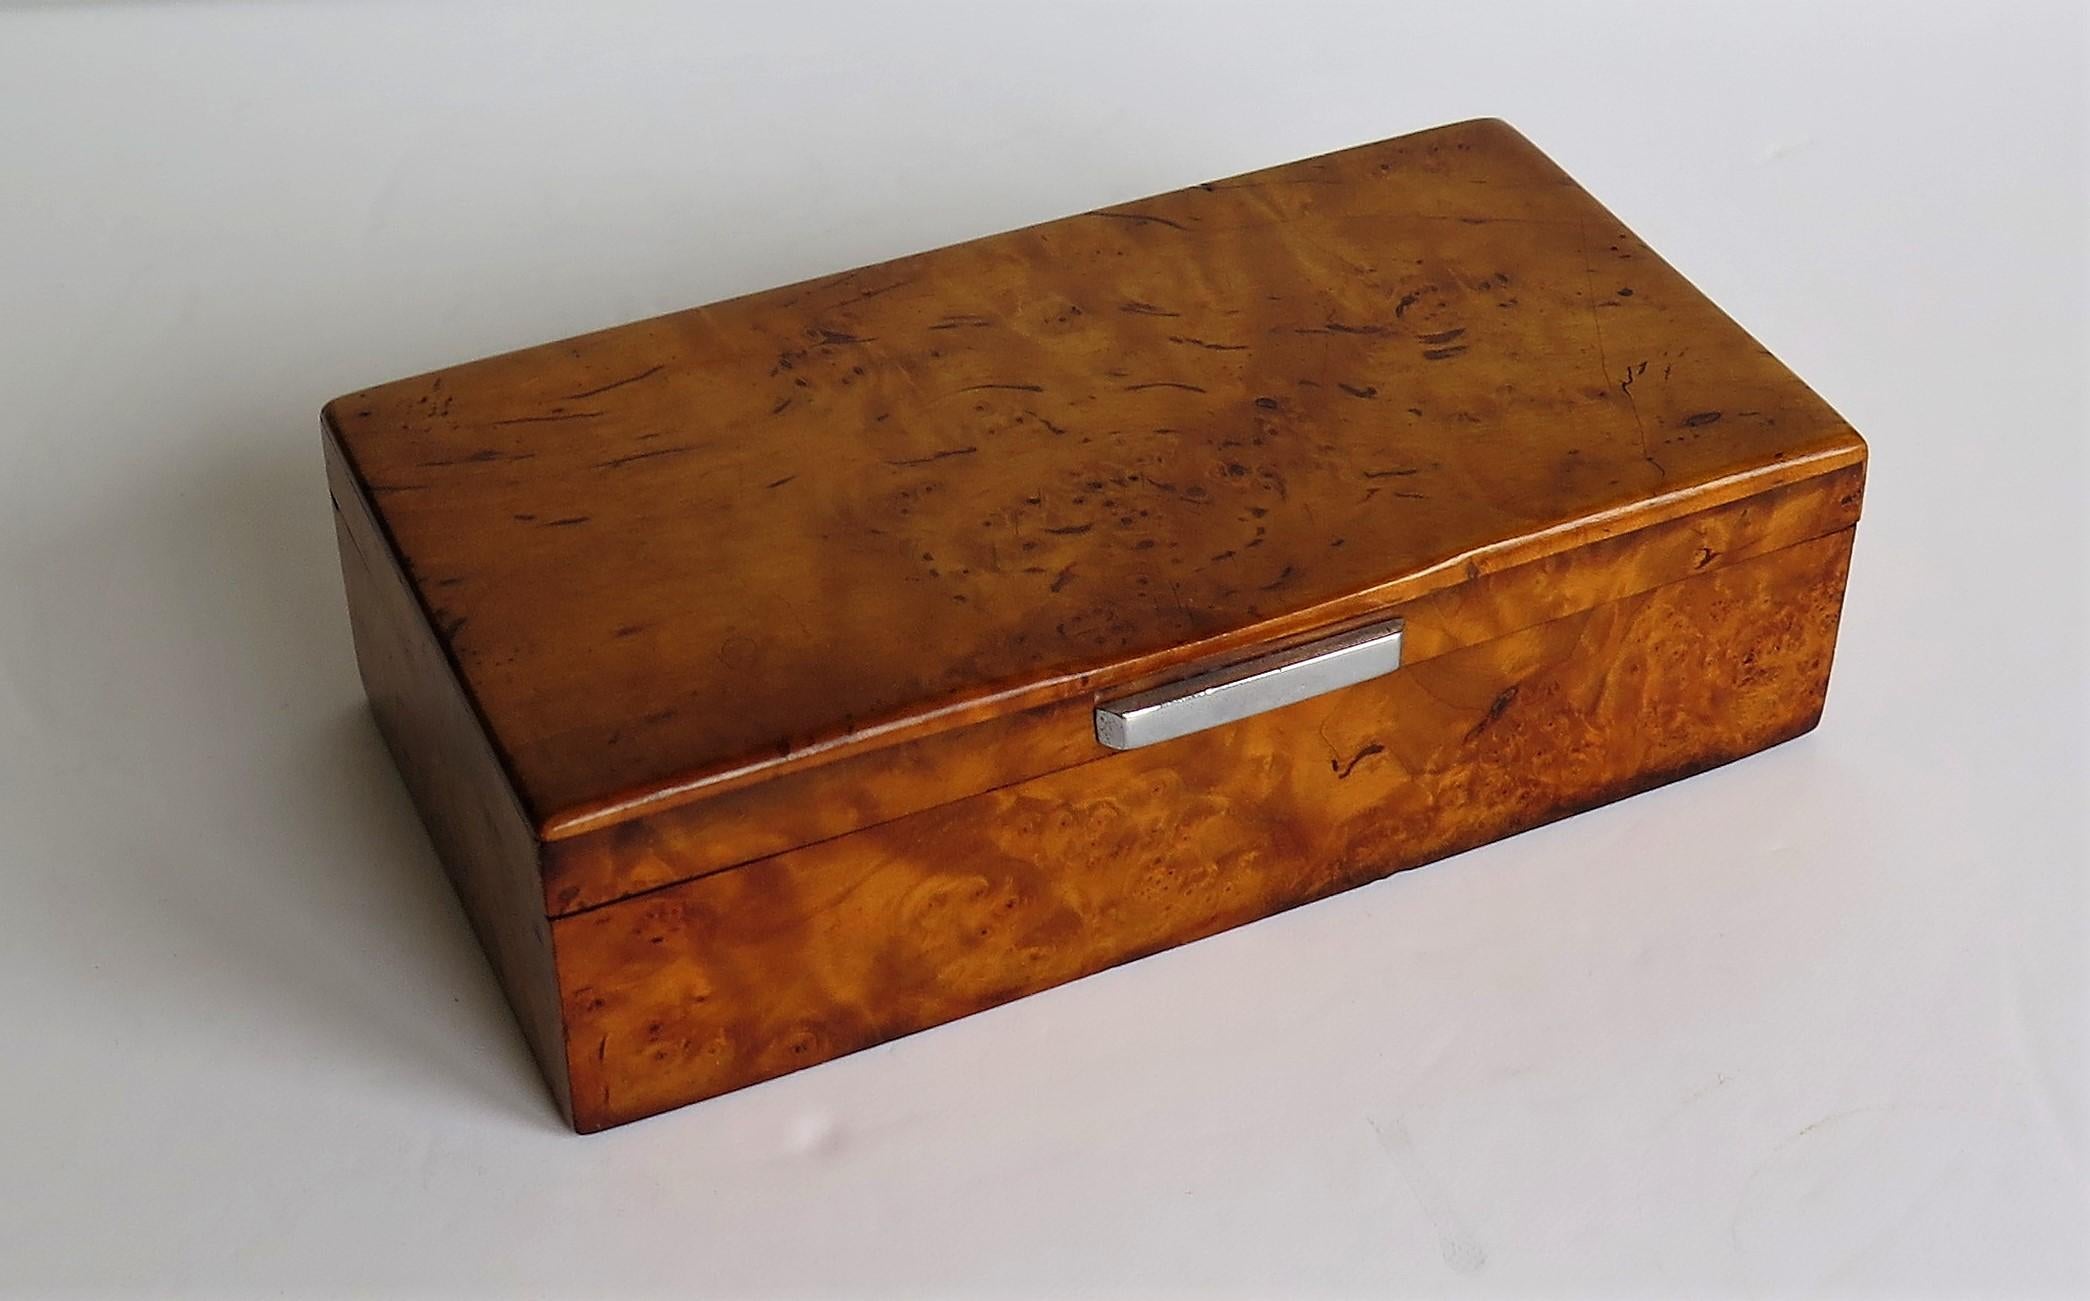 This is a very good quality French Art Deco period Lidded Box, of Bird's Eye Maple with a chrome bar handle, dating to circa 1925.
The box has a rectangular shape with bevel rounded edges to the top. The plan view of the top has been designed with a